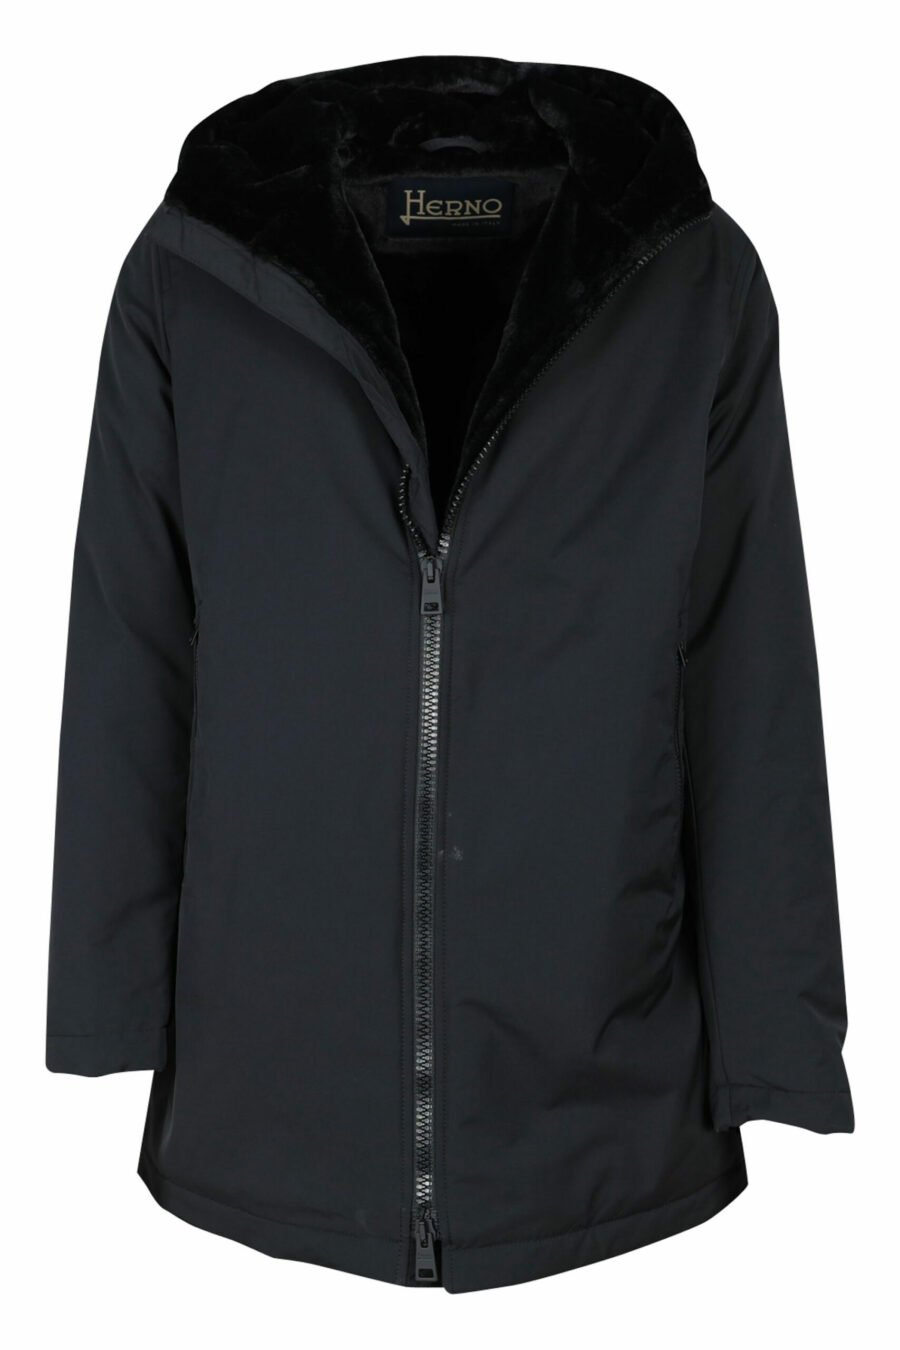 Black parka with hood and synthetic lining - 8055721650272 scaled